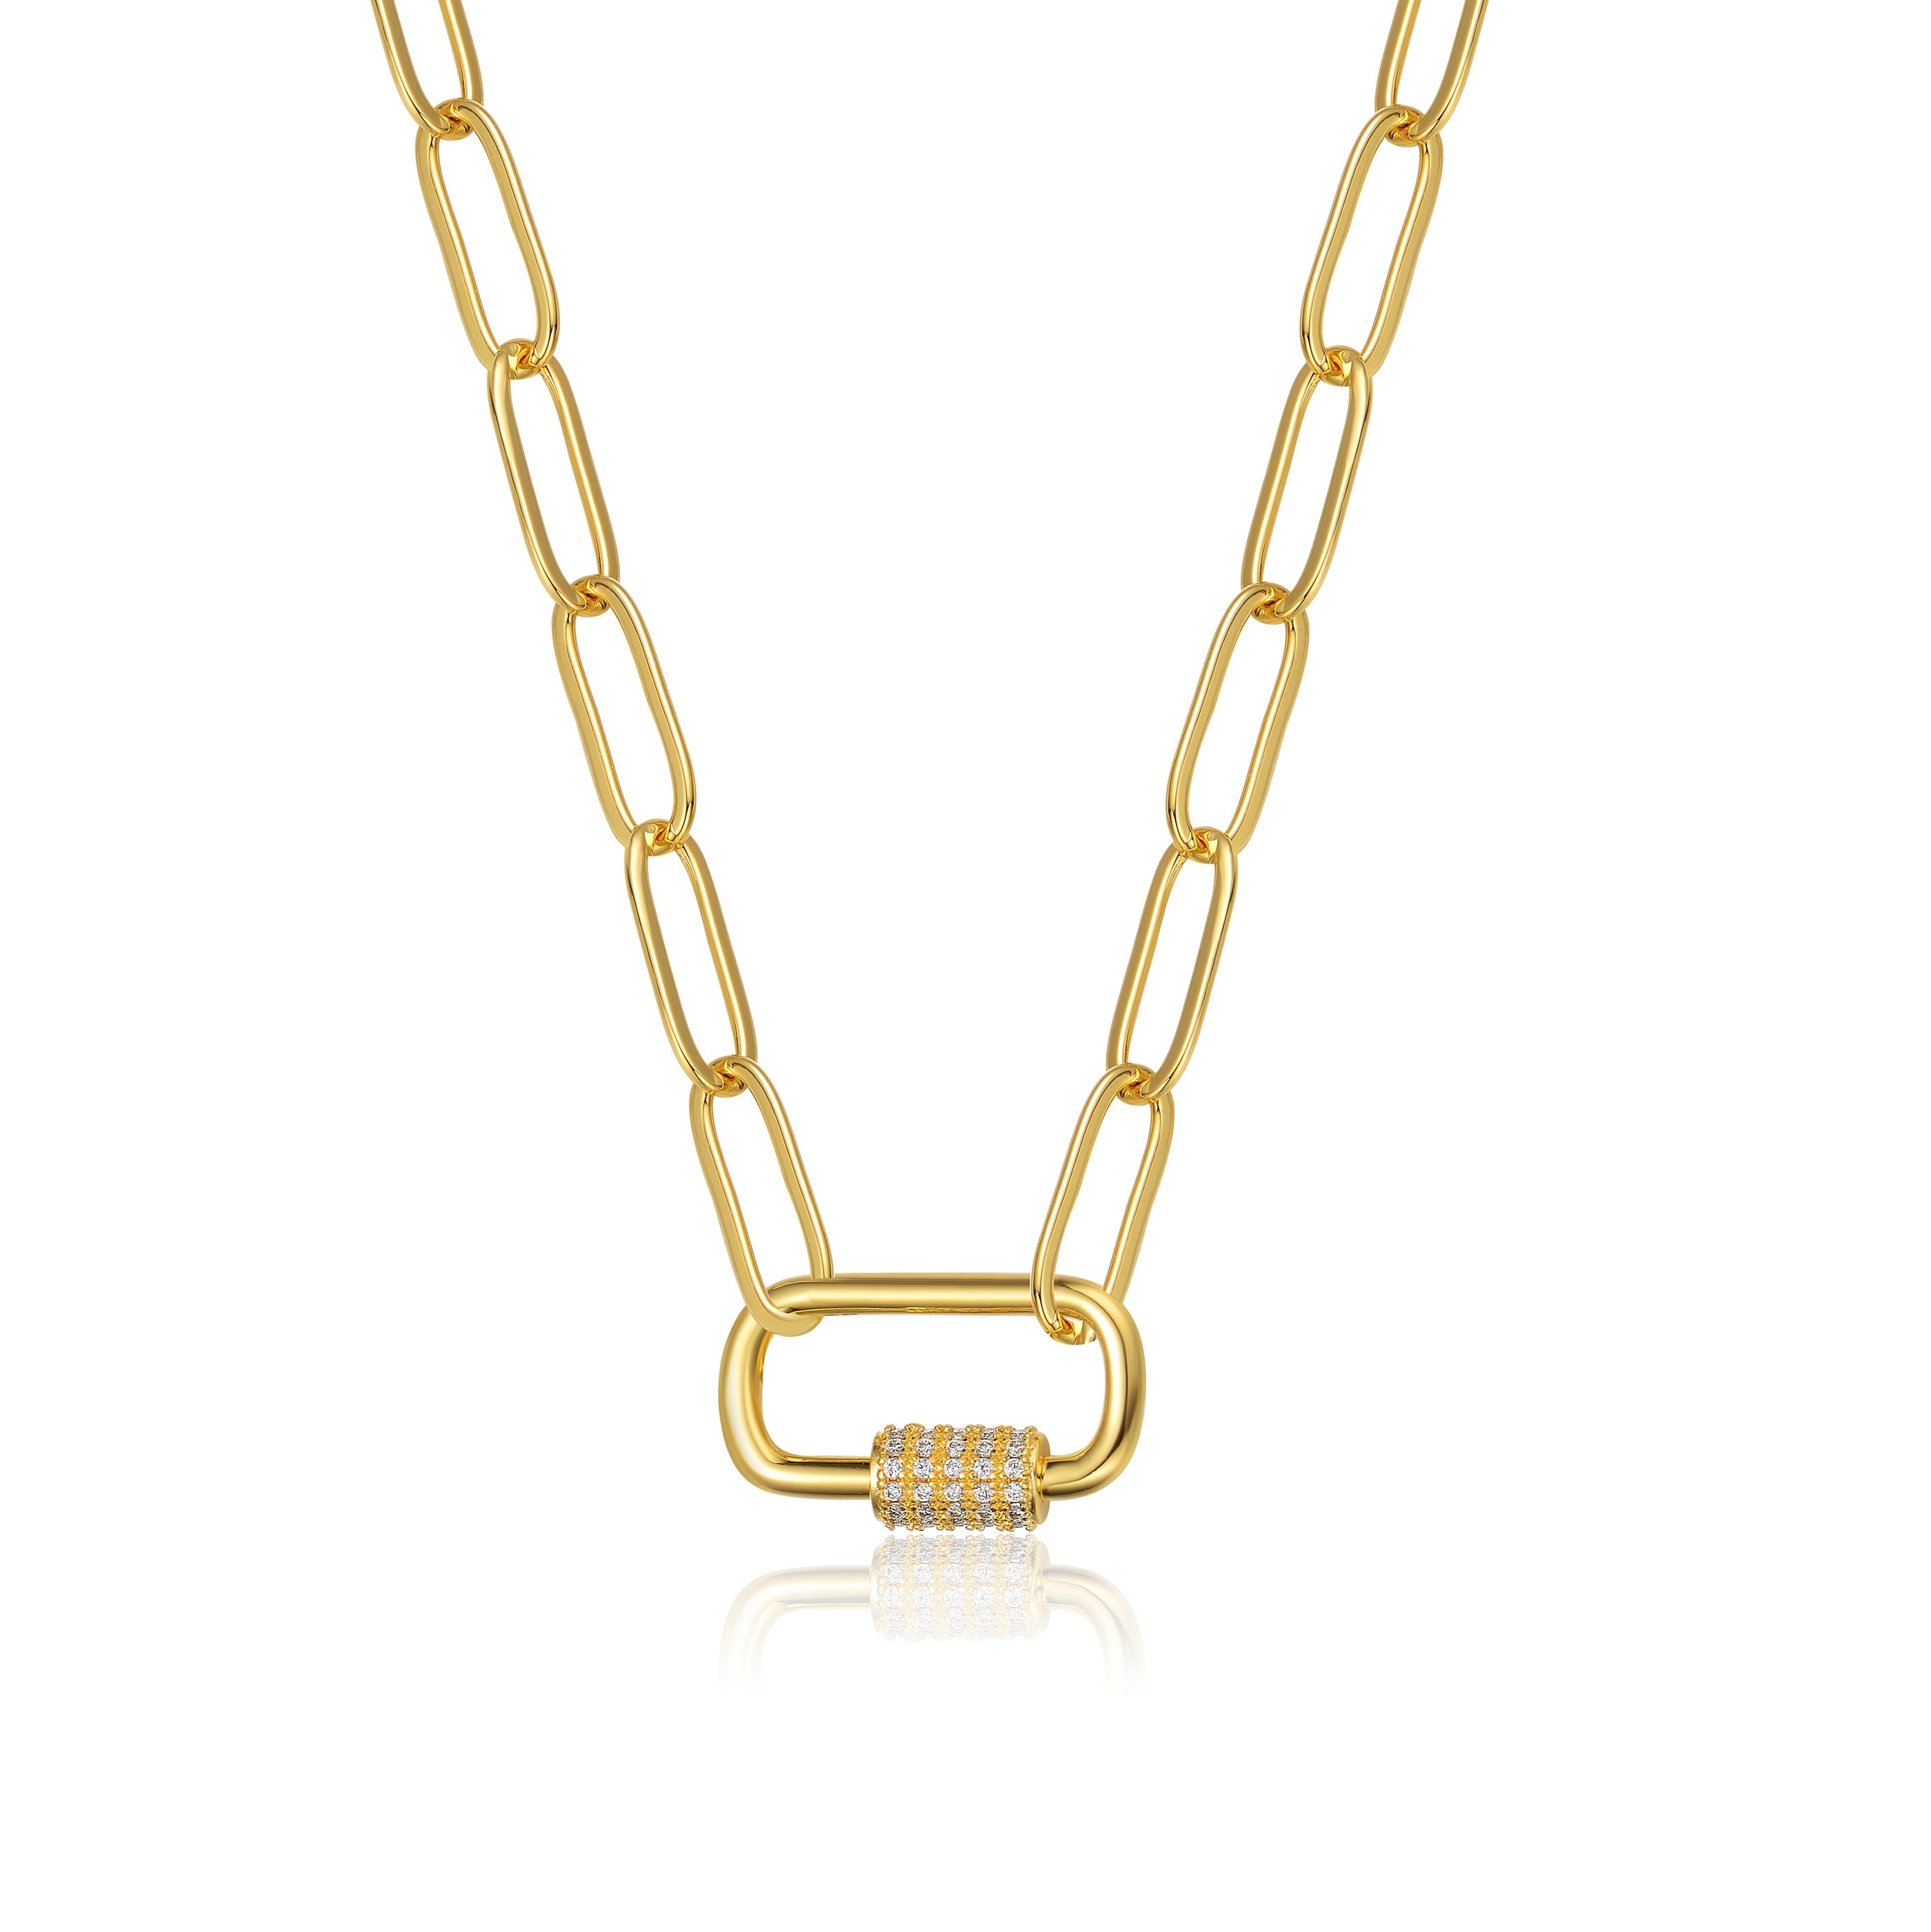 Rg Children's 14k Gold Plated Chain Necklace